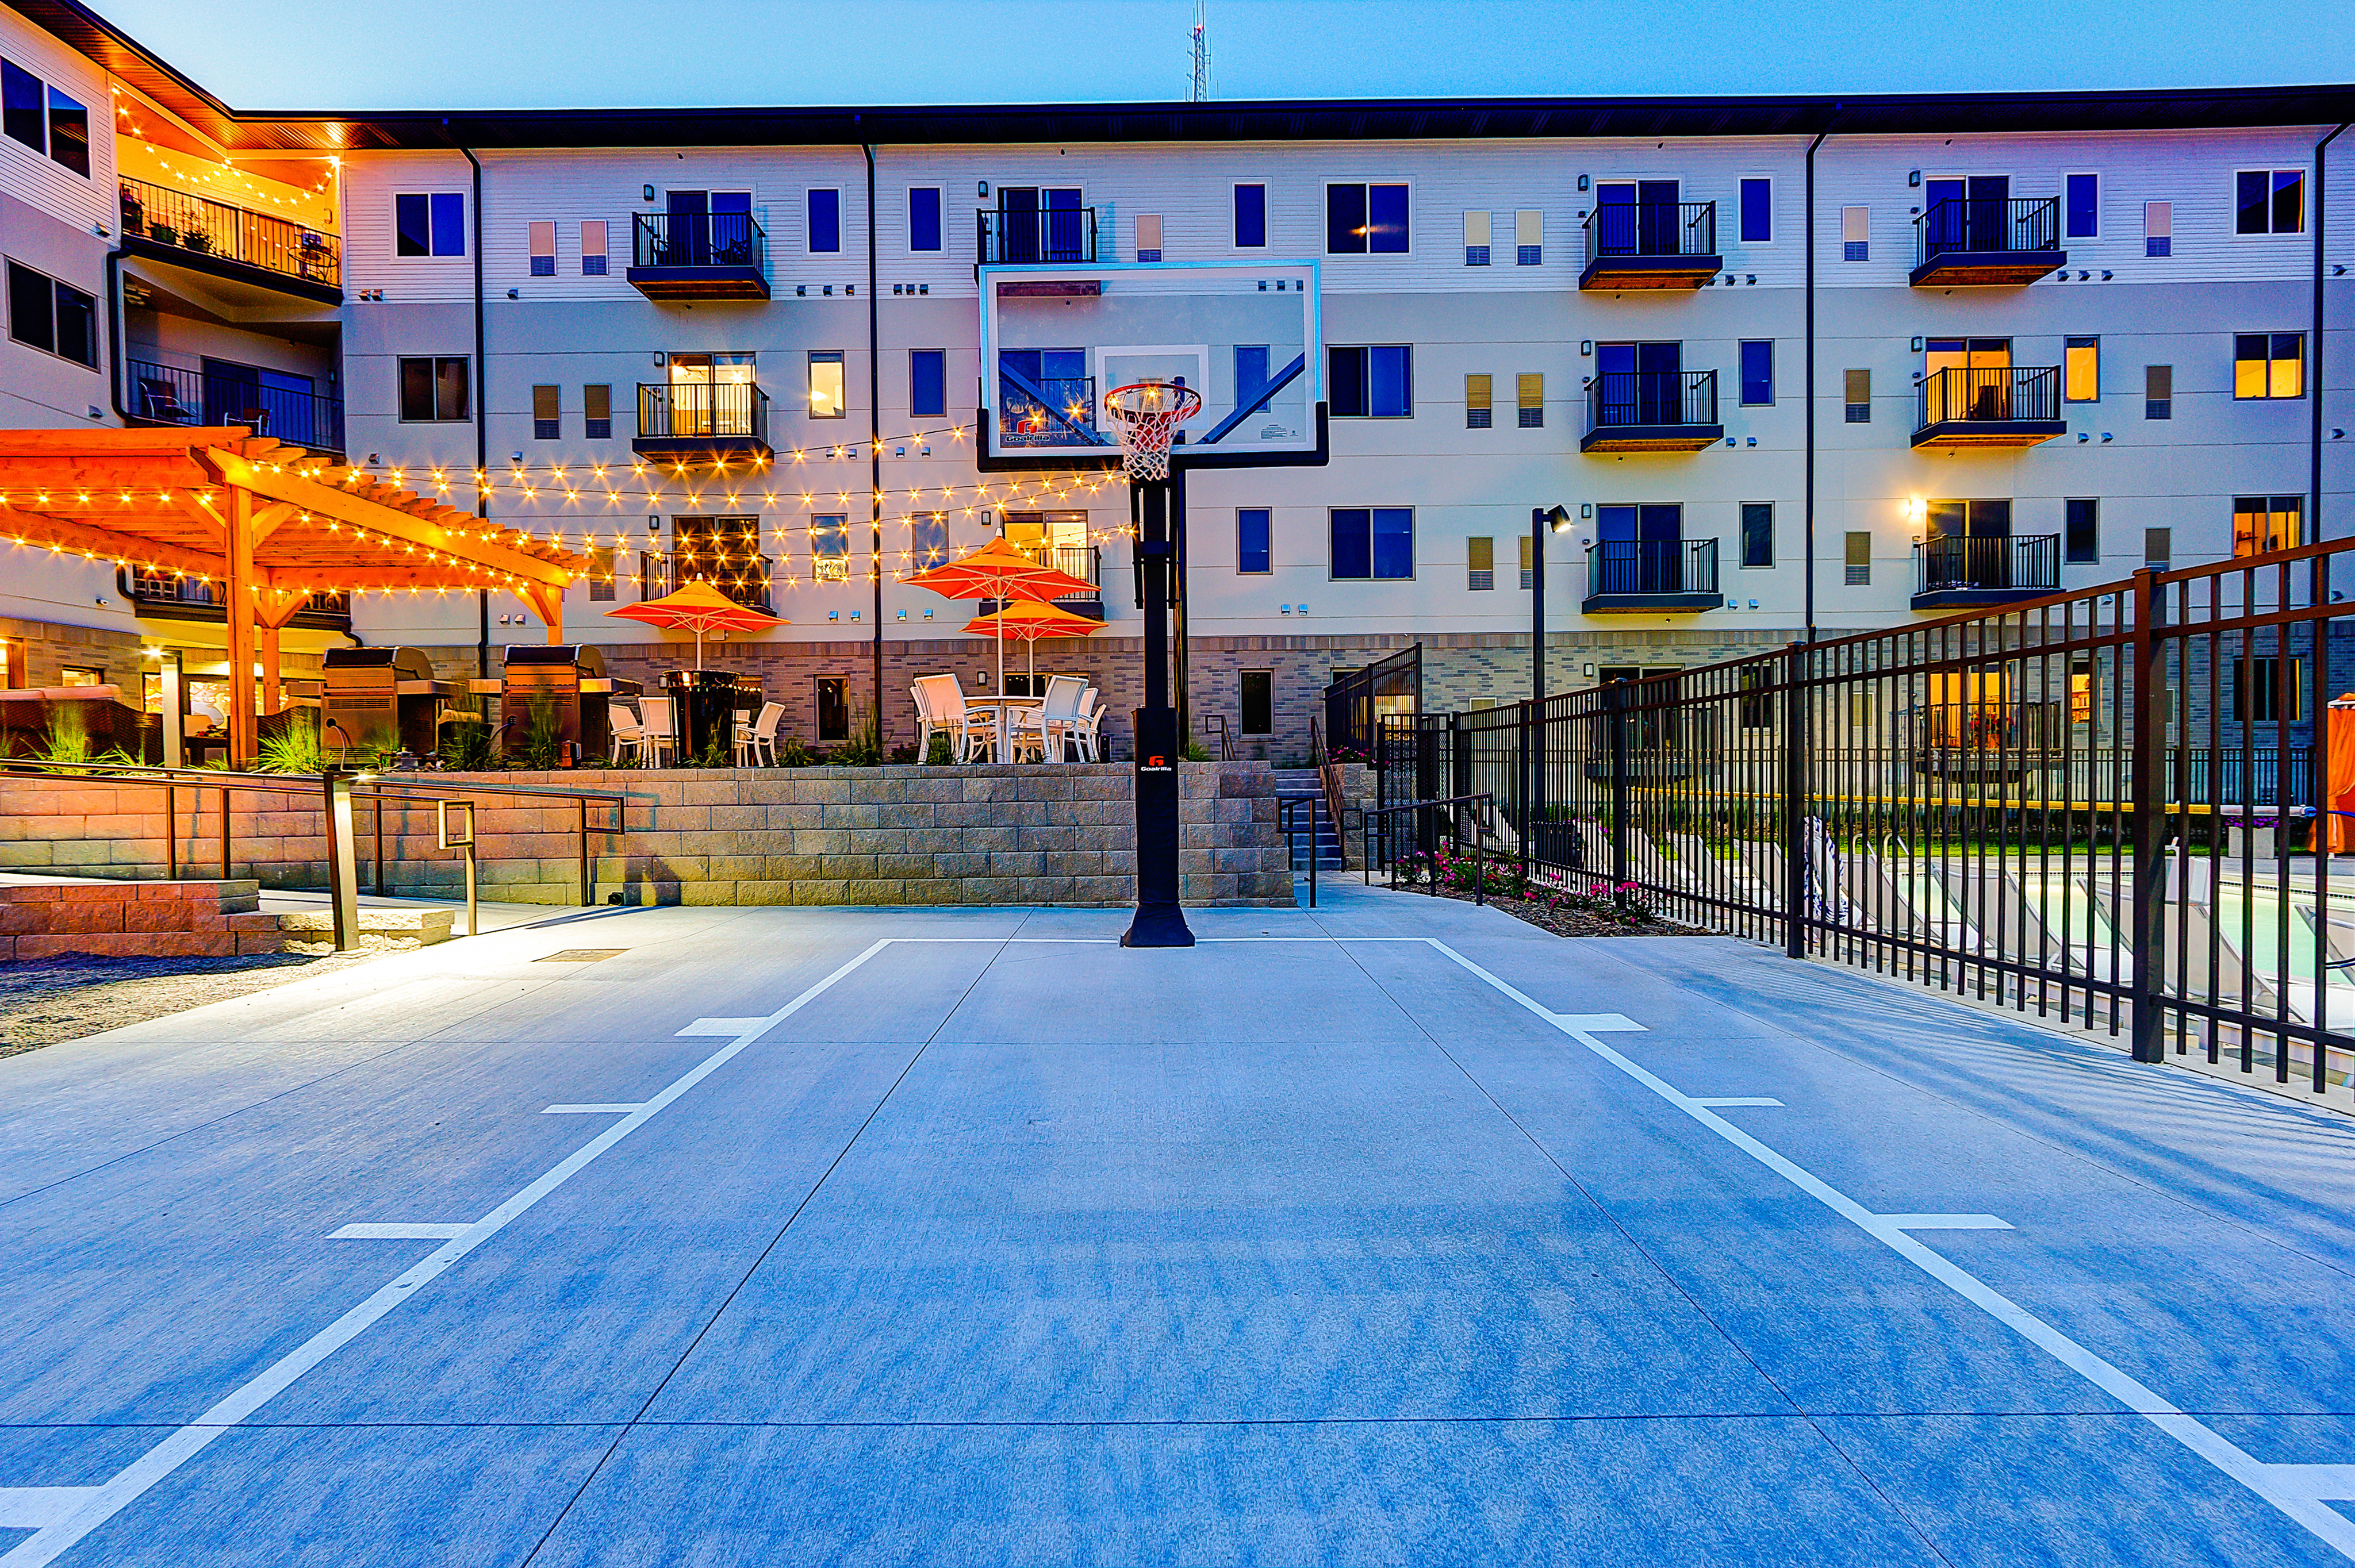 Image of Basketball Court for SPACES